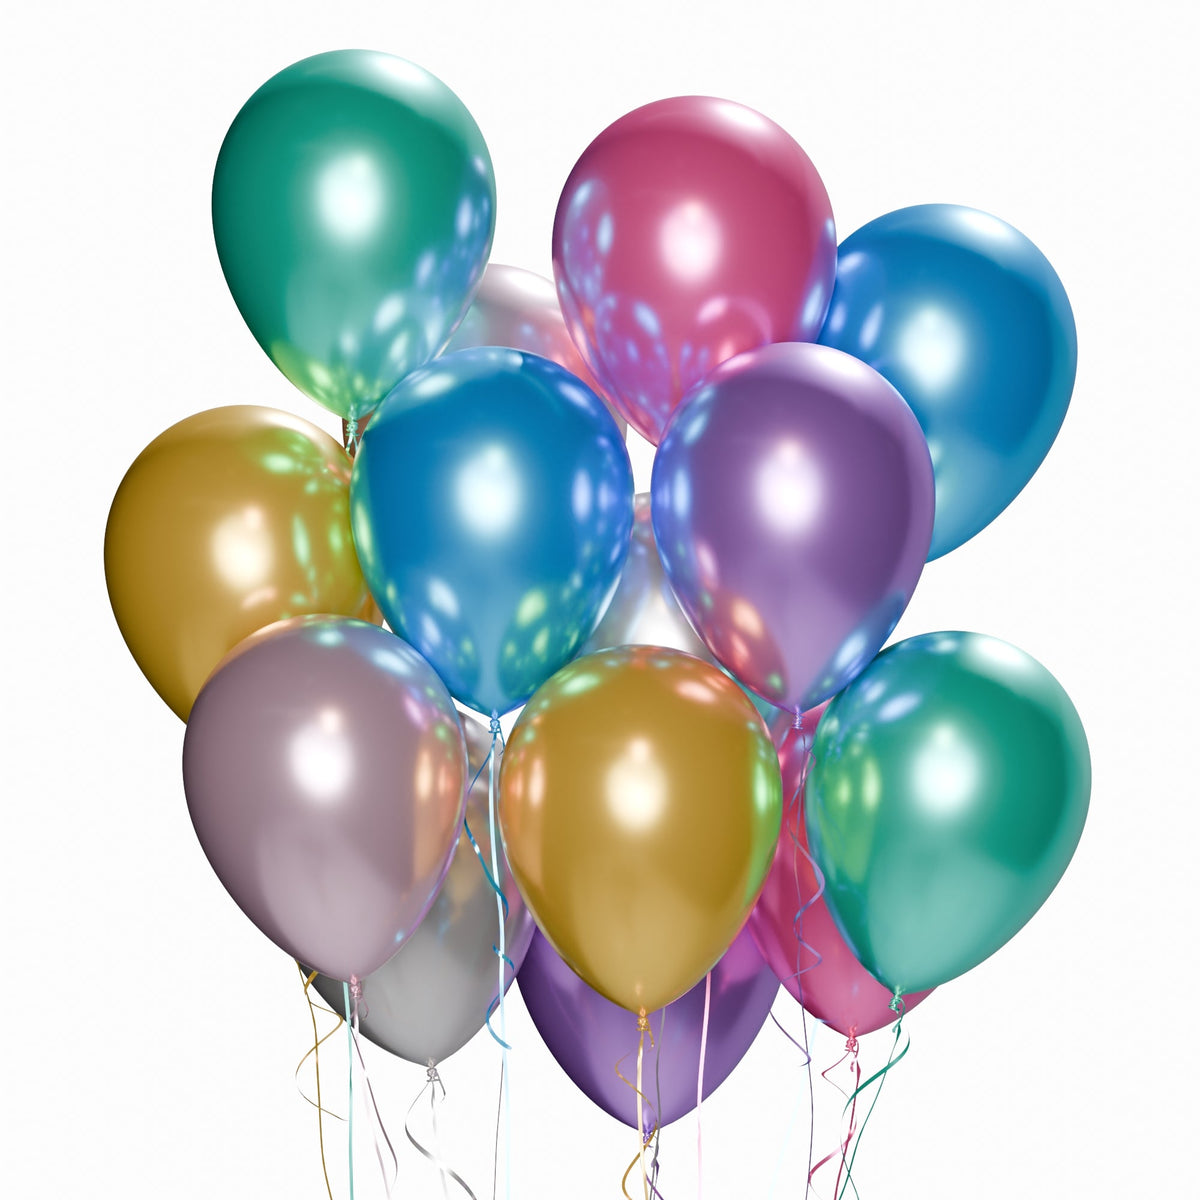 WIDE OCEAN INTERNATIONAL TRADE BEIJING CO., LTD Balloons Assorted Latex Balloon 12 Inches, Chrome Collection, 72 Count 810064198731